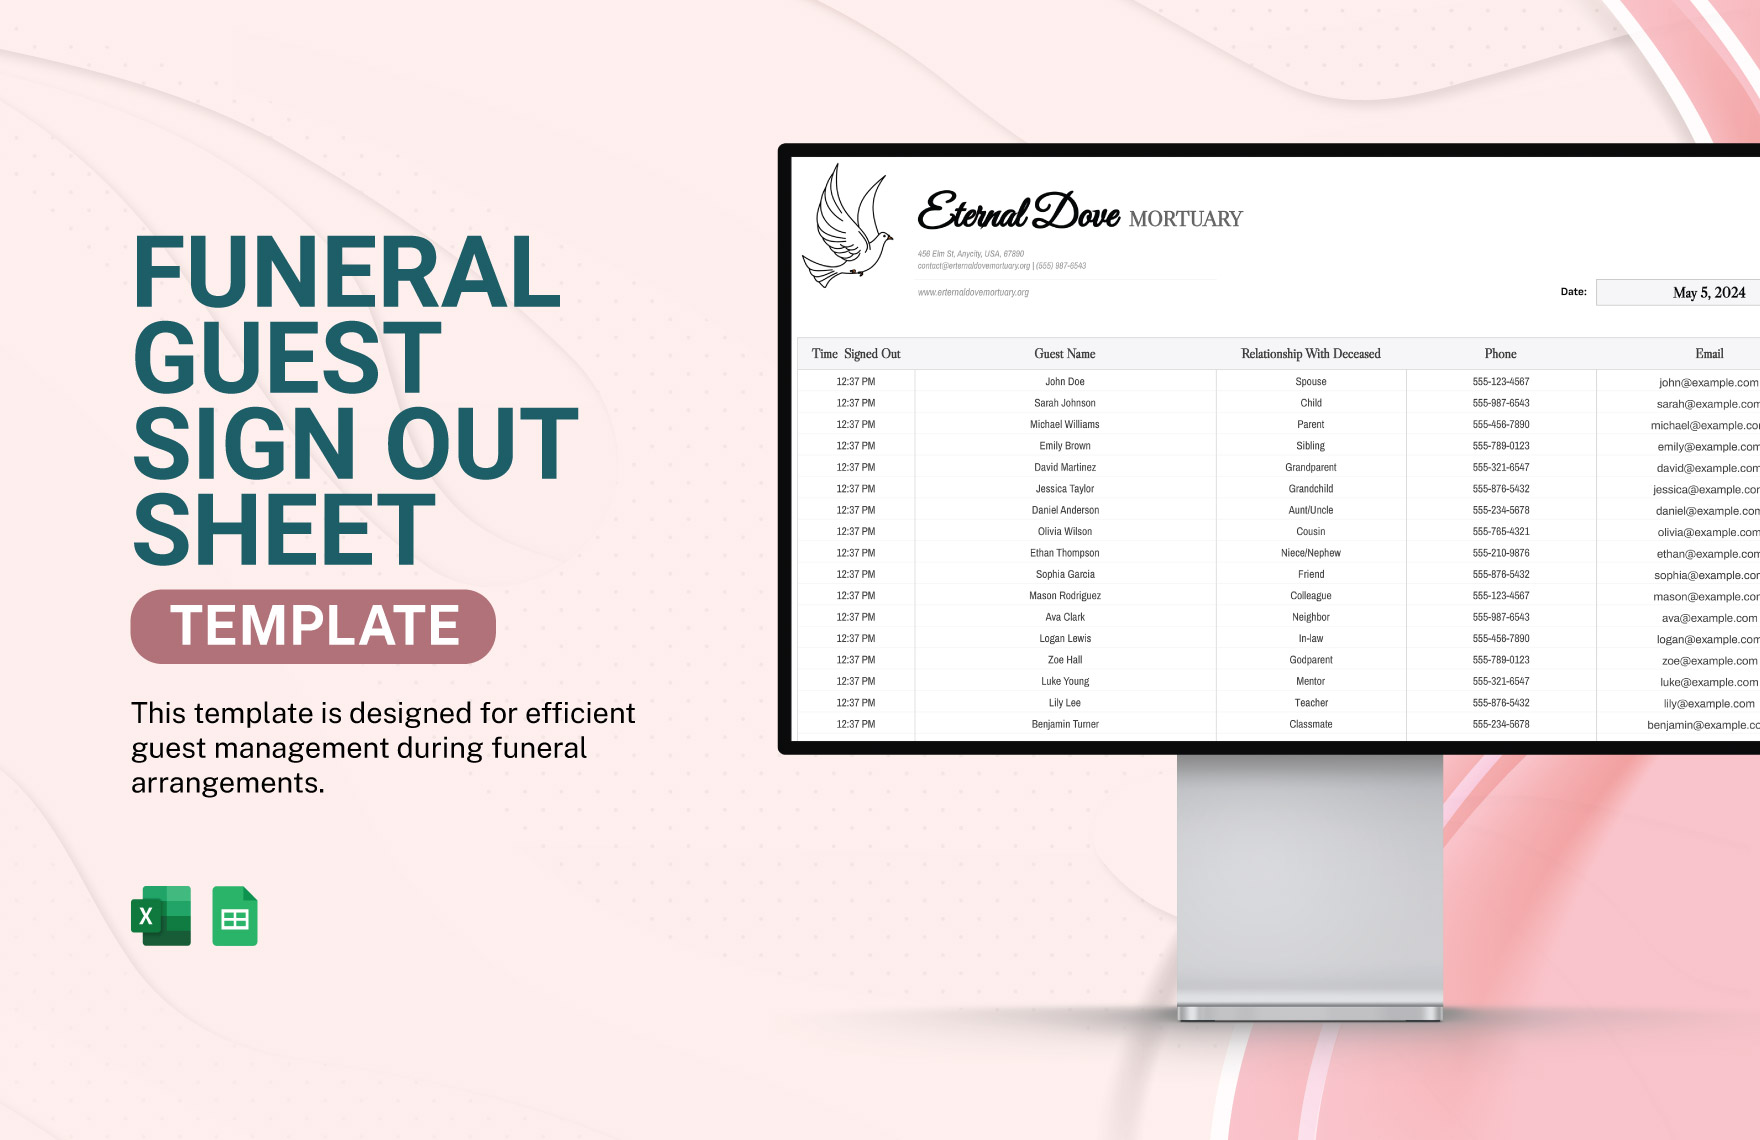 Funeral Guest Sign Out Sheet Template in Excel, Google Sheets